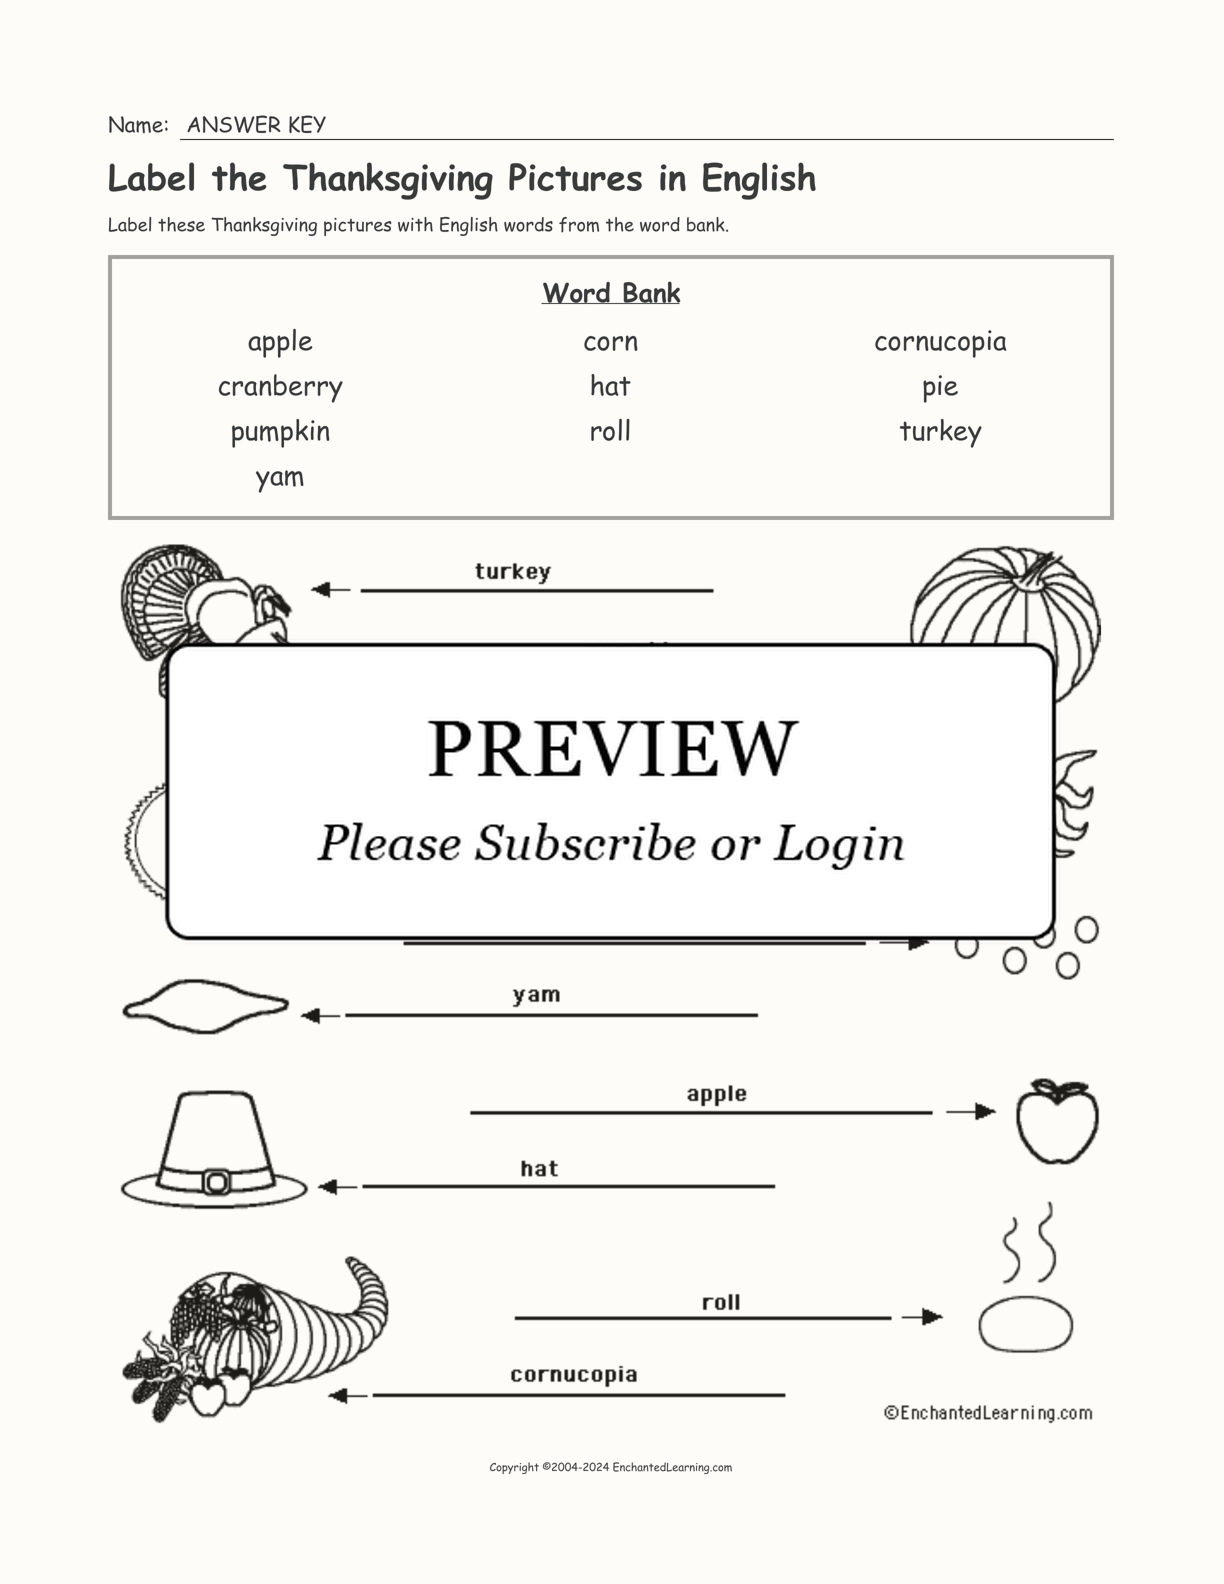 Label the Thanksgiving Pictures in English interactive worksheet page 2